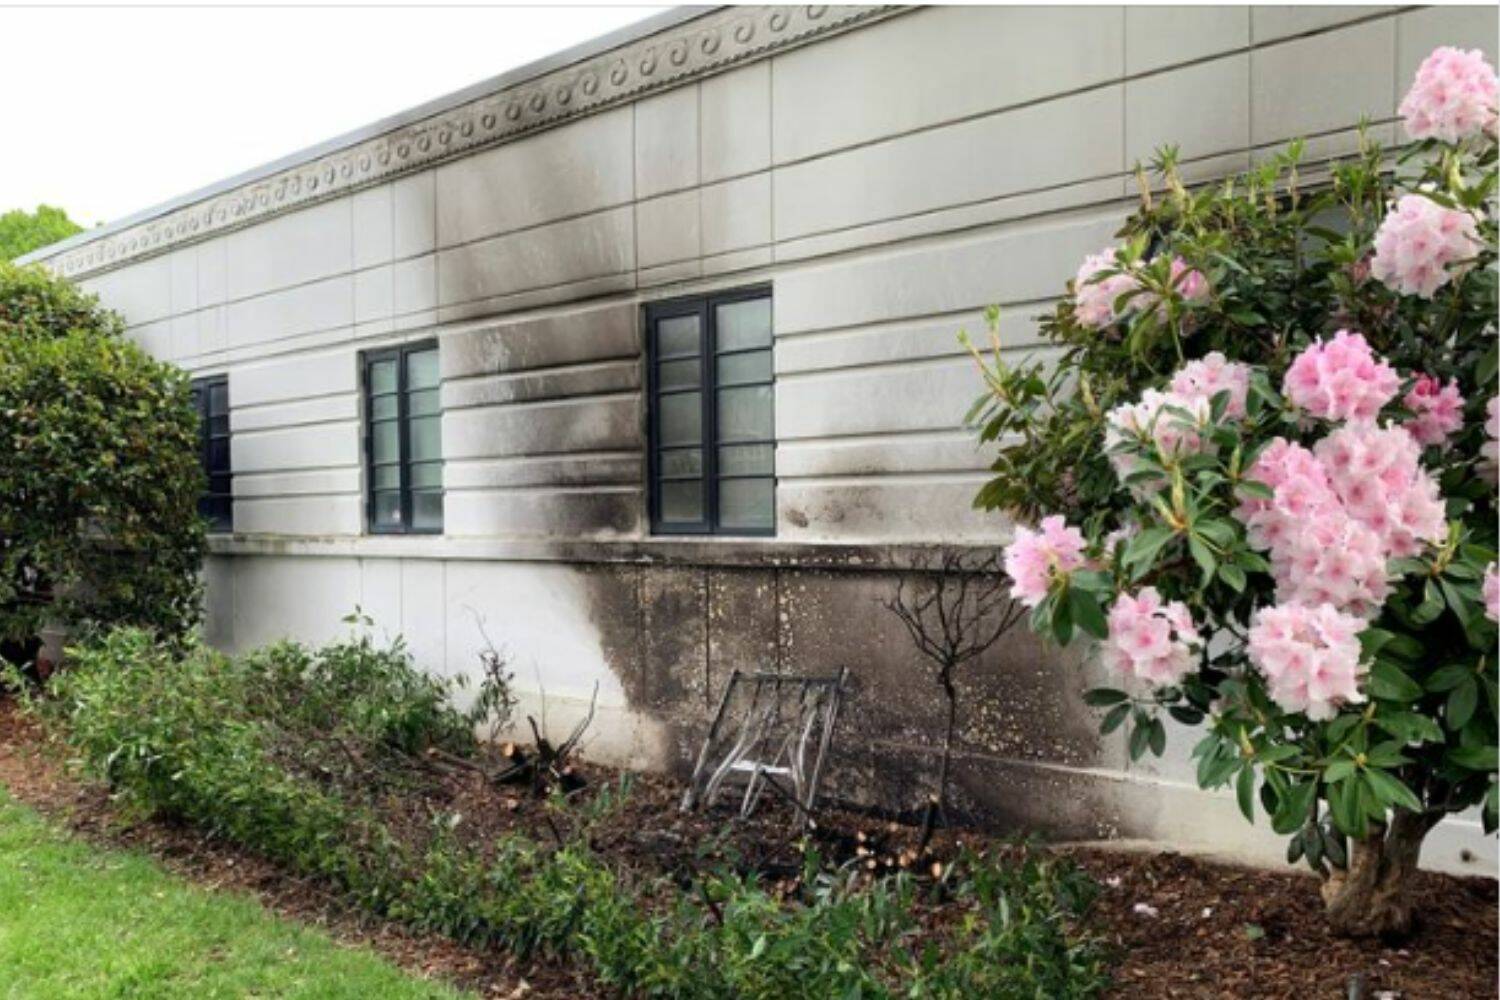 Damage to the Renton History Museum as result of the fire. (Screenshot from Facebook)